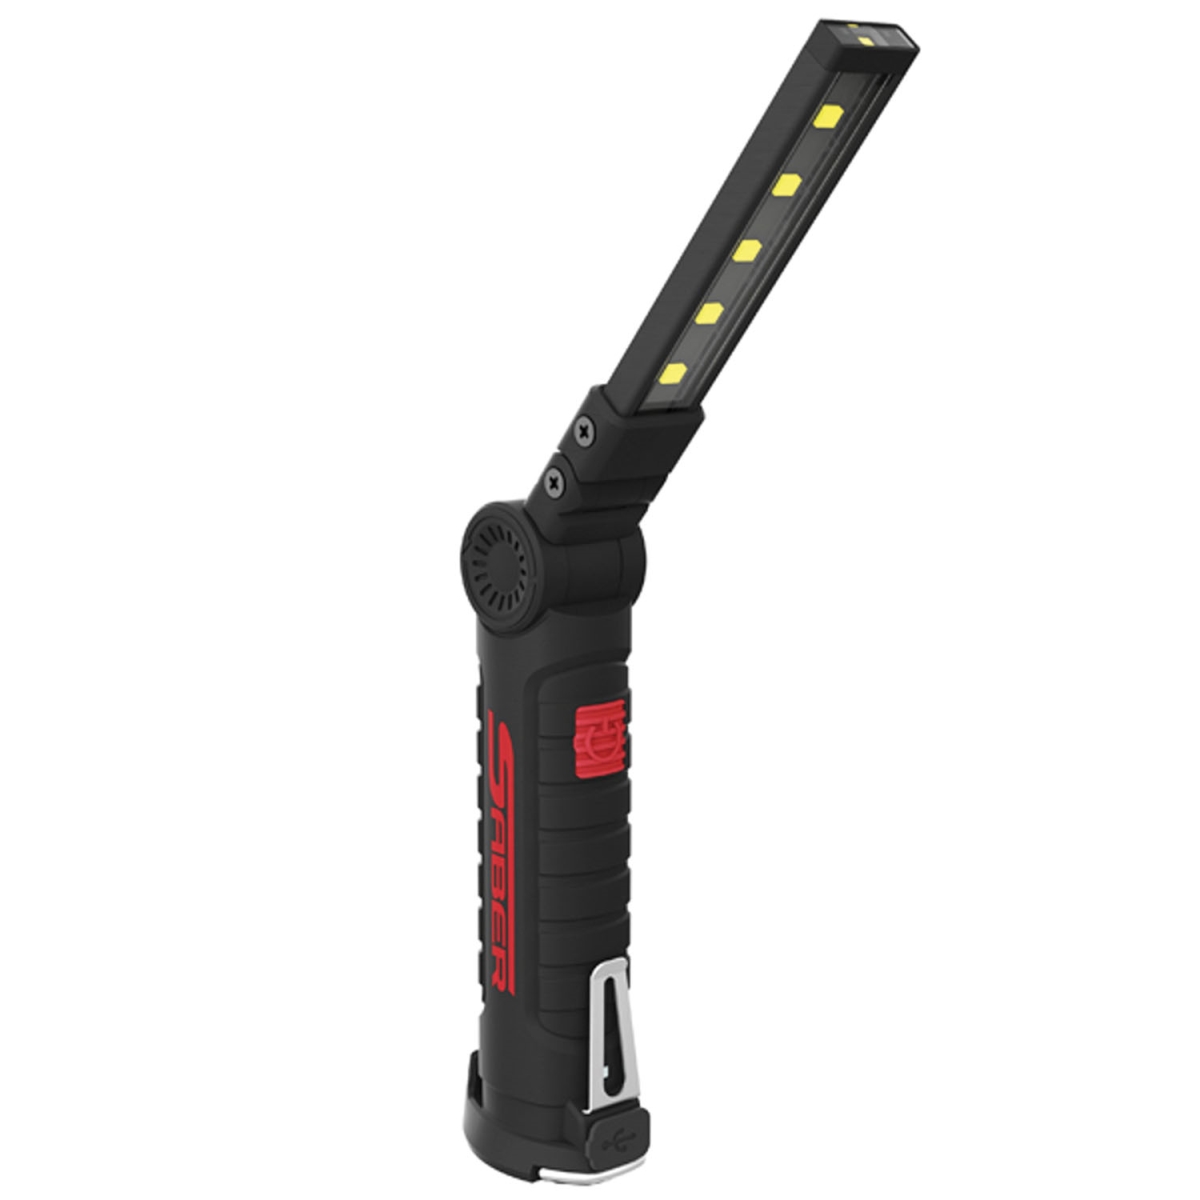 Atd Tools Atd-80369a 150 Lumen Usb Rechargeable Folding Thin Light